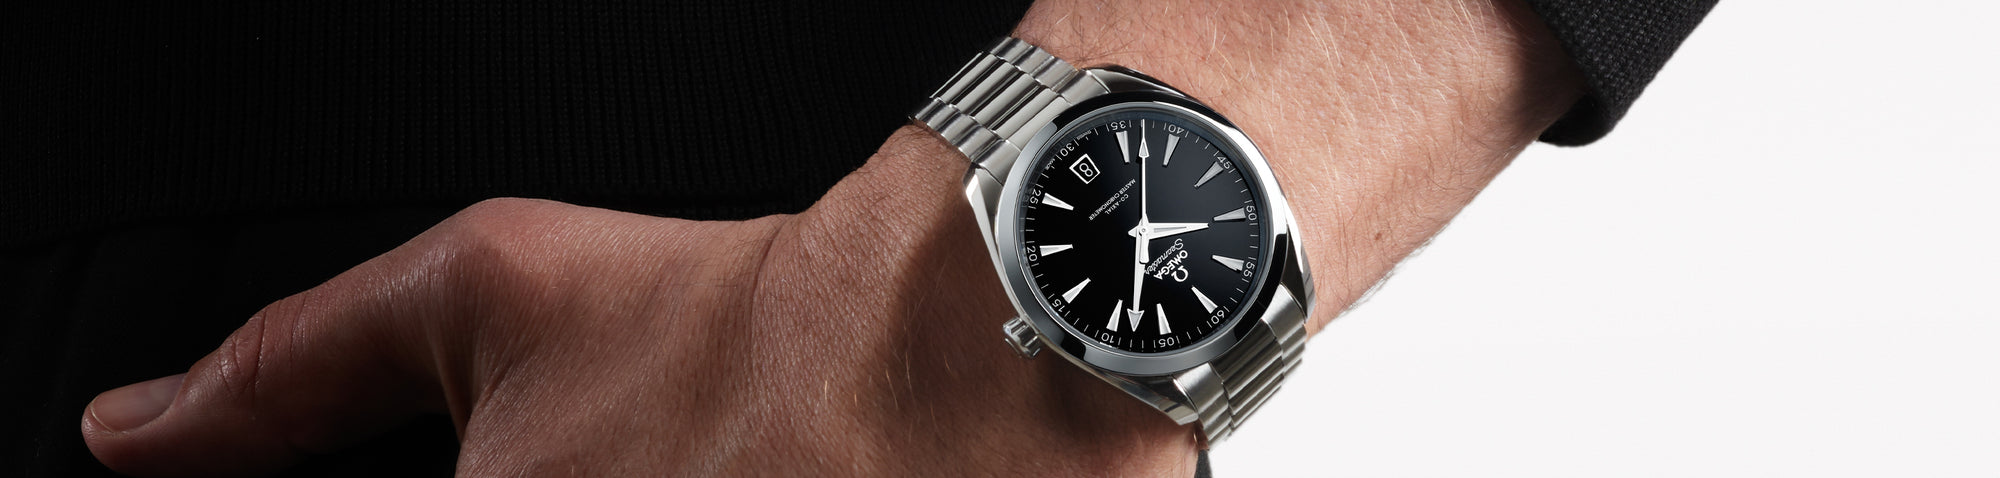 The Omega Seamaster Aqua Terra Arrives With A New Black Dial In Three Sizes (And A New Micro-Adjust Clasp!)